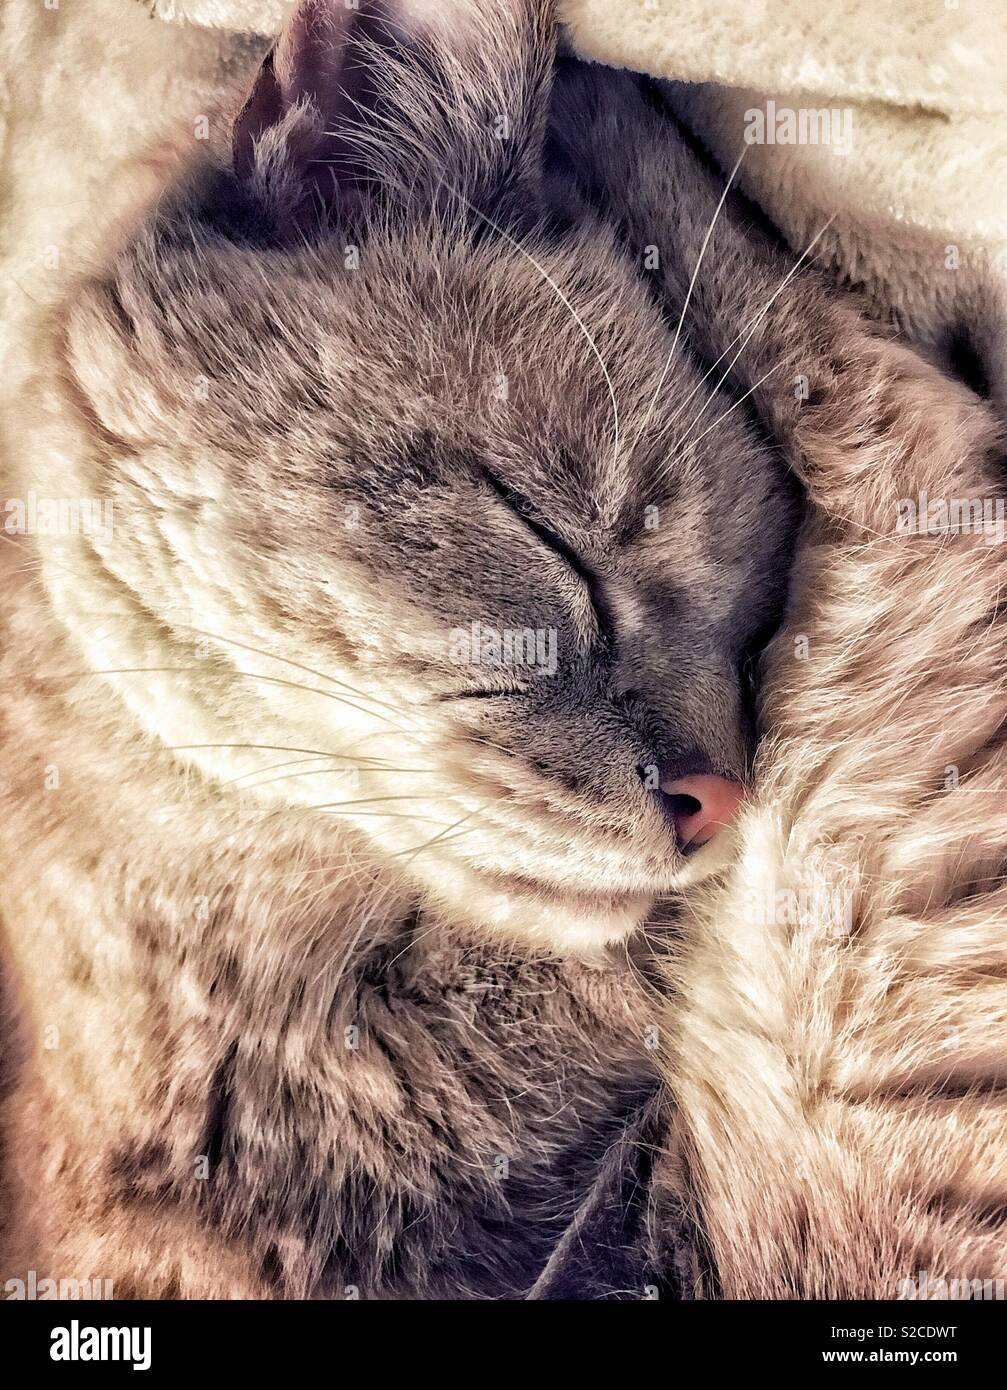 Lynx point Siamese cat sleeping in a ball with head on back legs Stock Photo